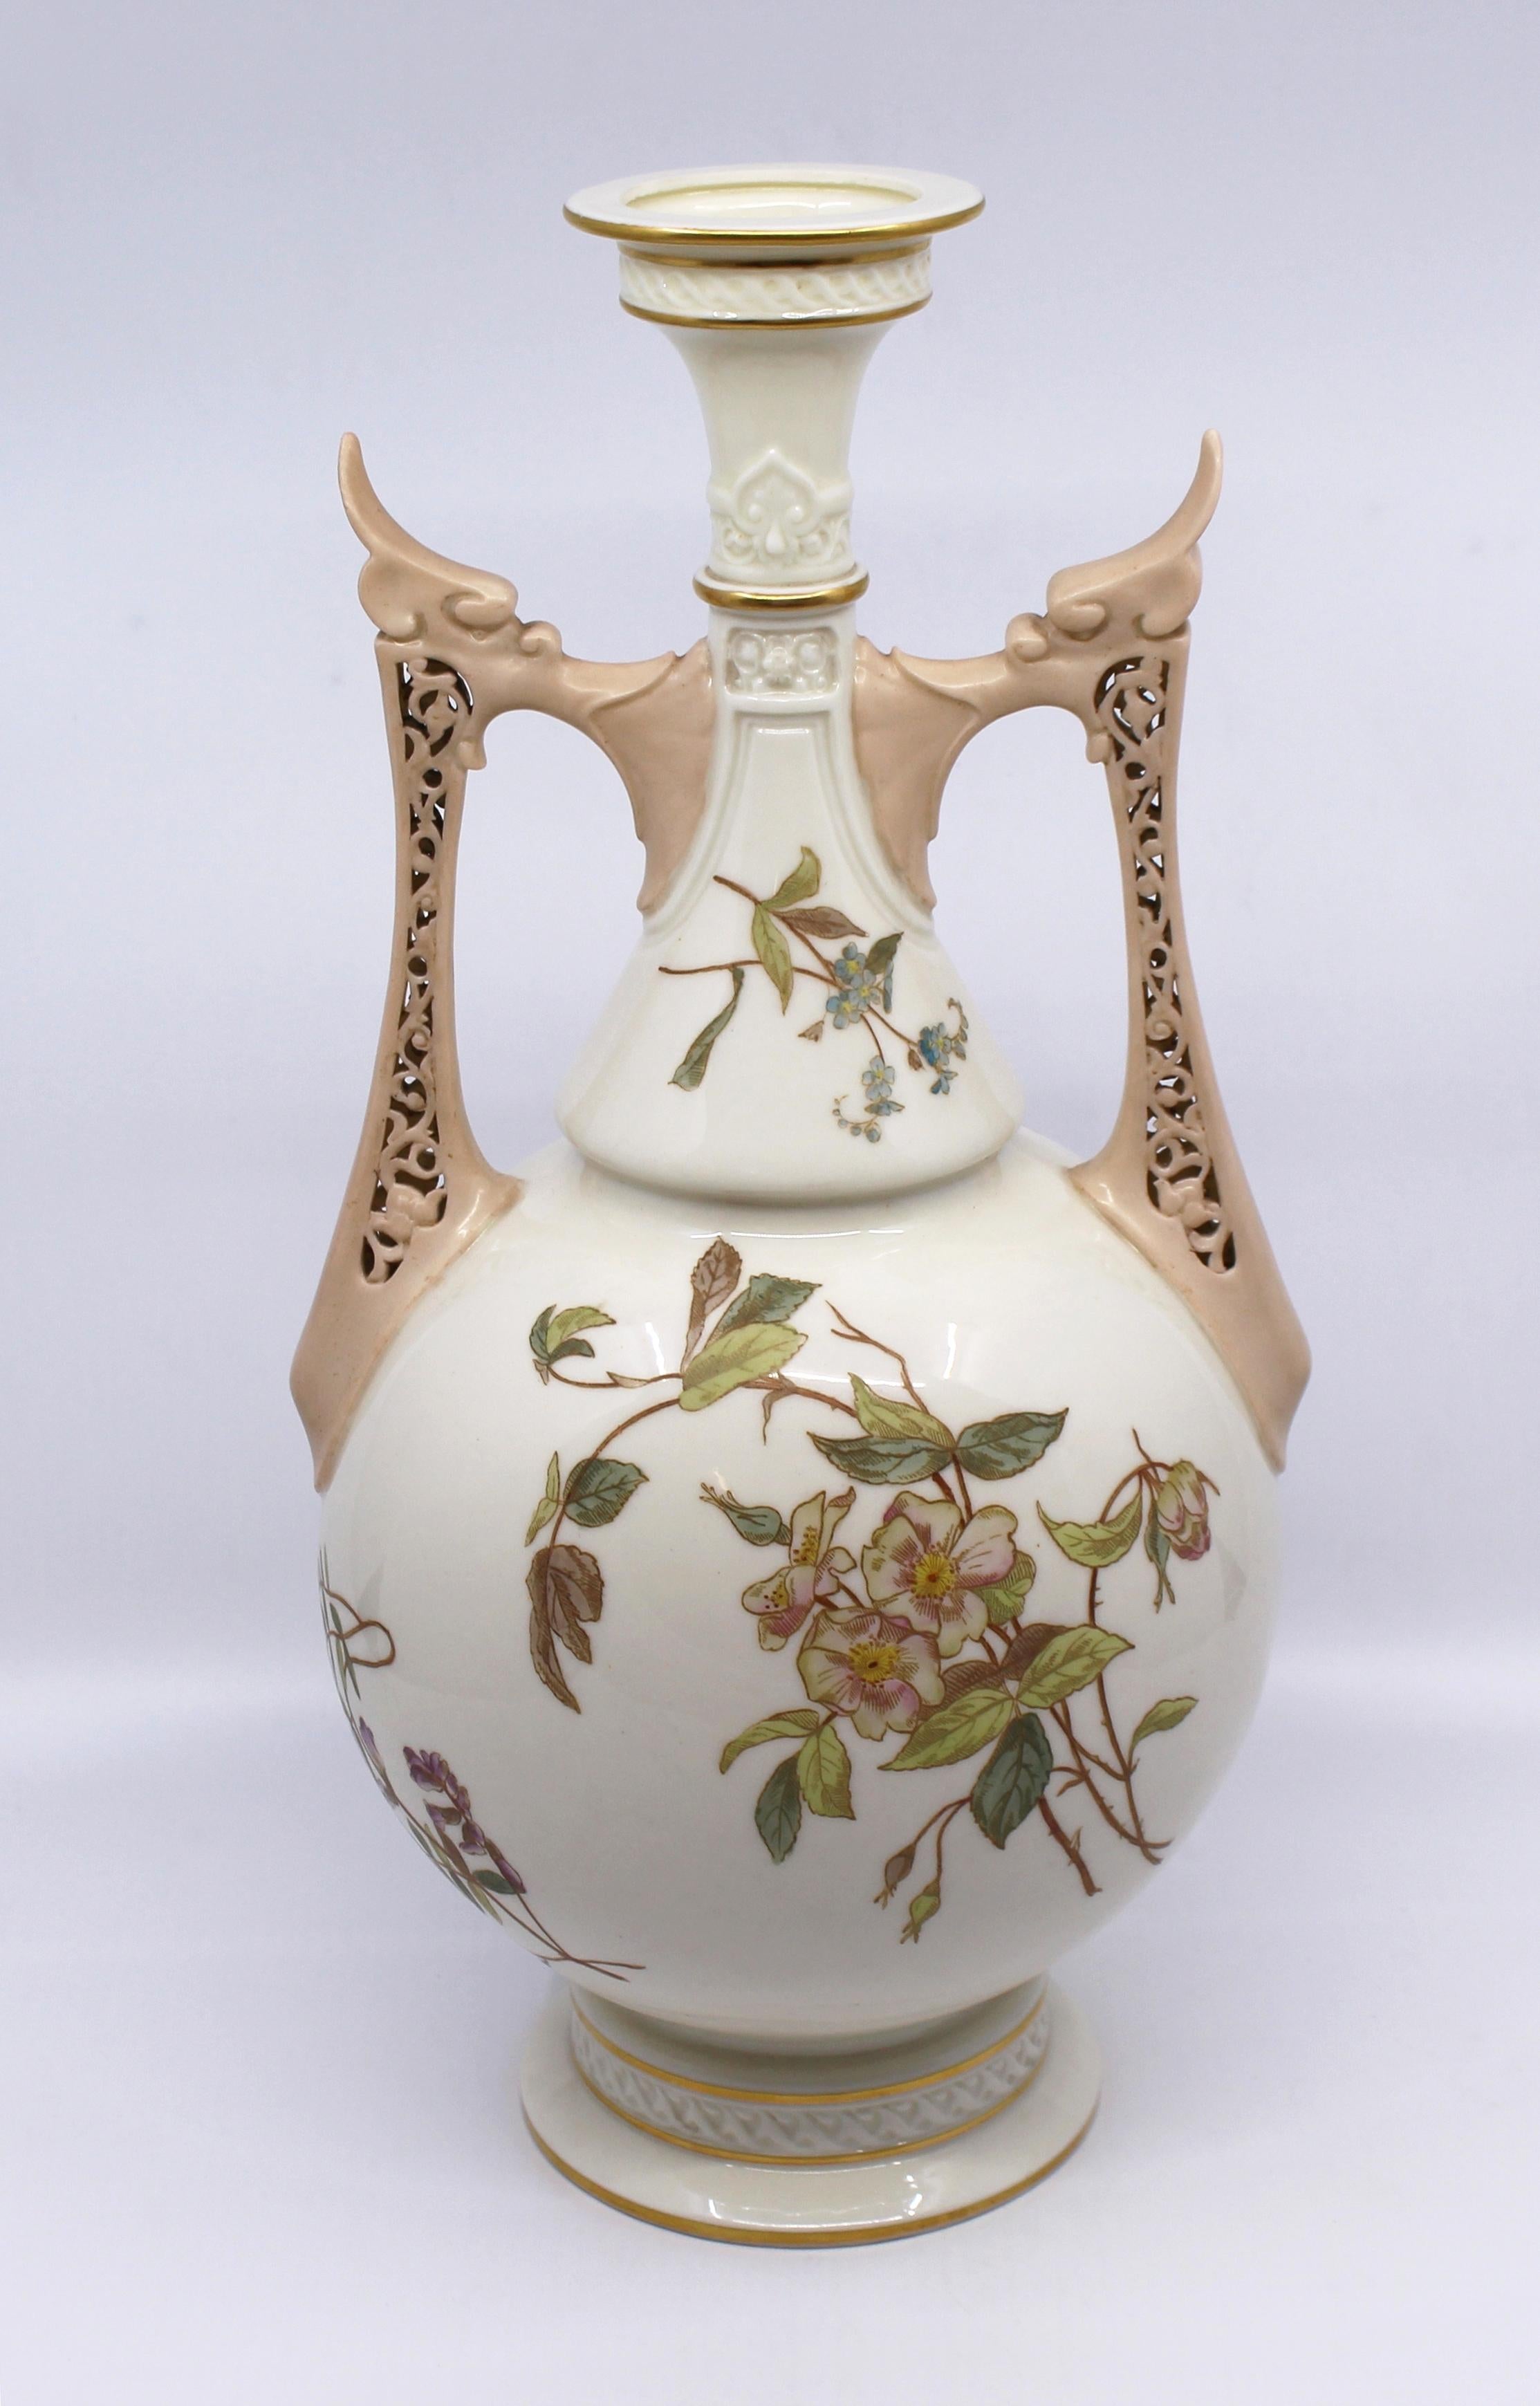 Period:
Late 19th century, English

Manufacturer:
Royal Worcester

Date: 
1886

Backstamp 
Royal Worcester puce backstamp, date code for 1886, registration number, shape model 1071

Condition 
No chips, cracks or repairs. Gilding